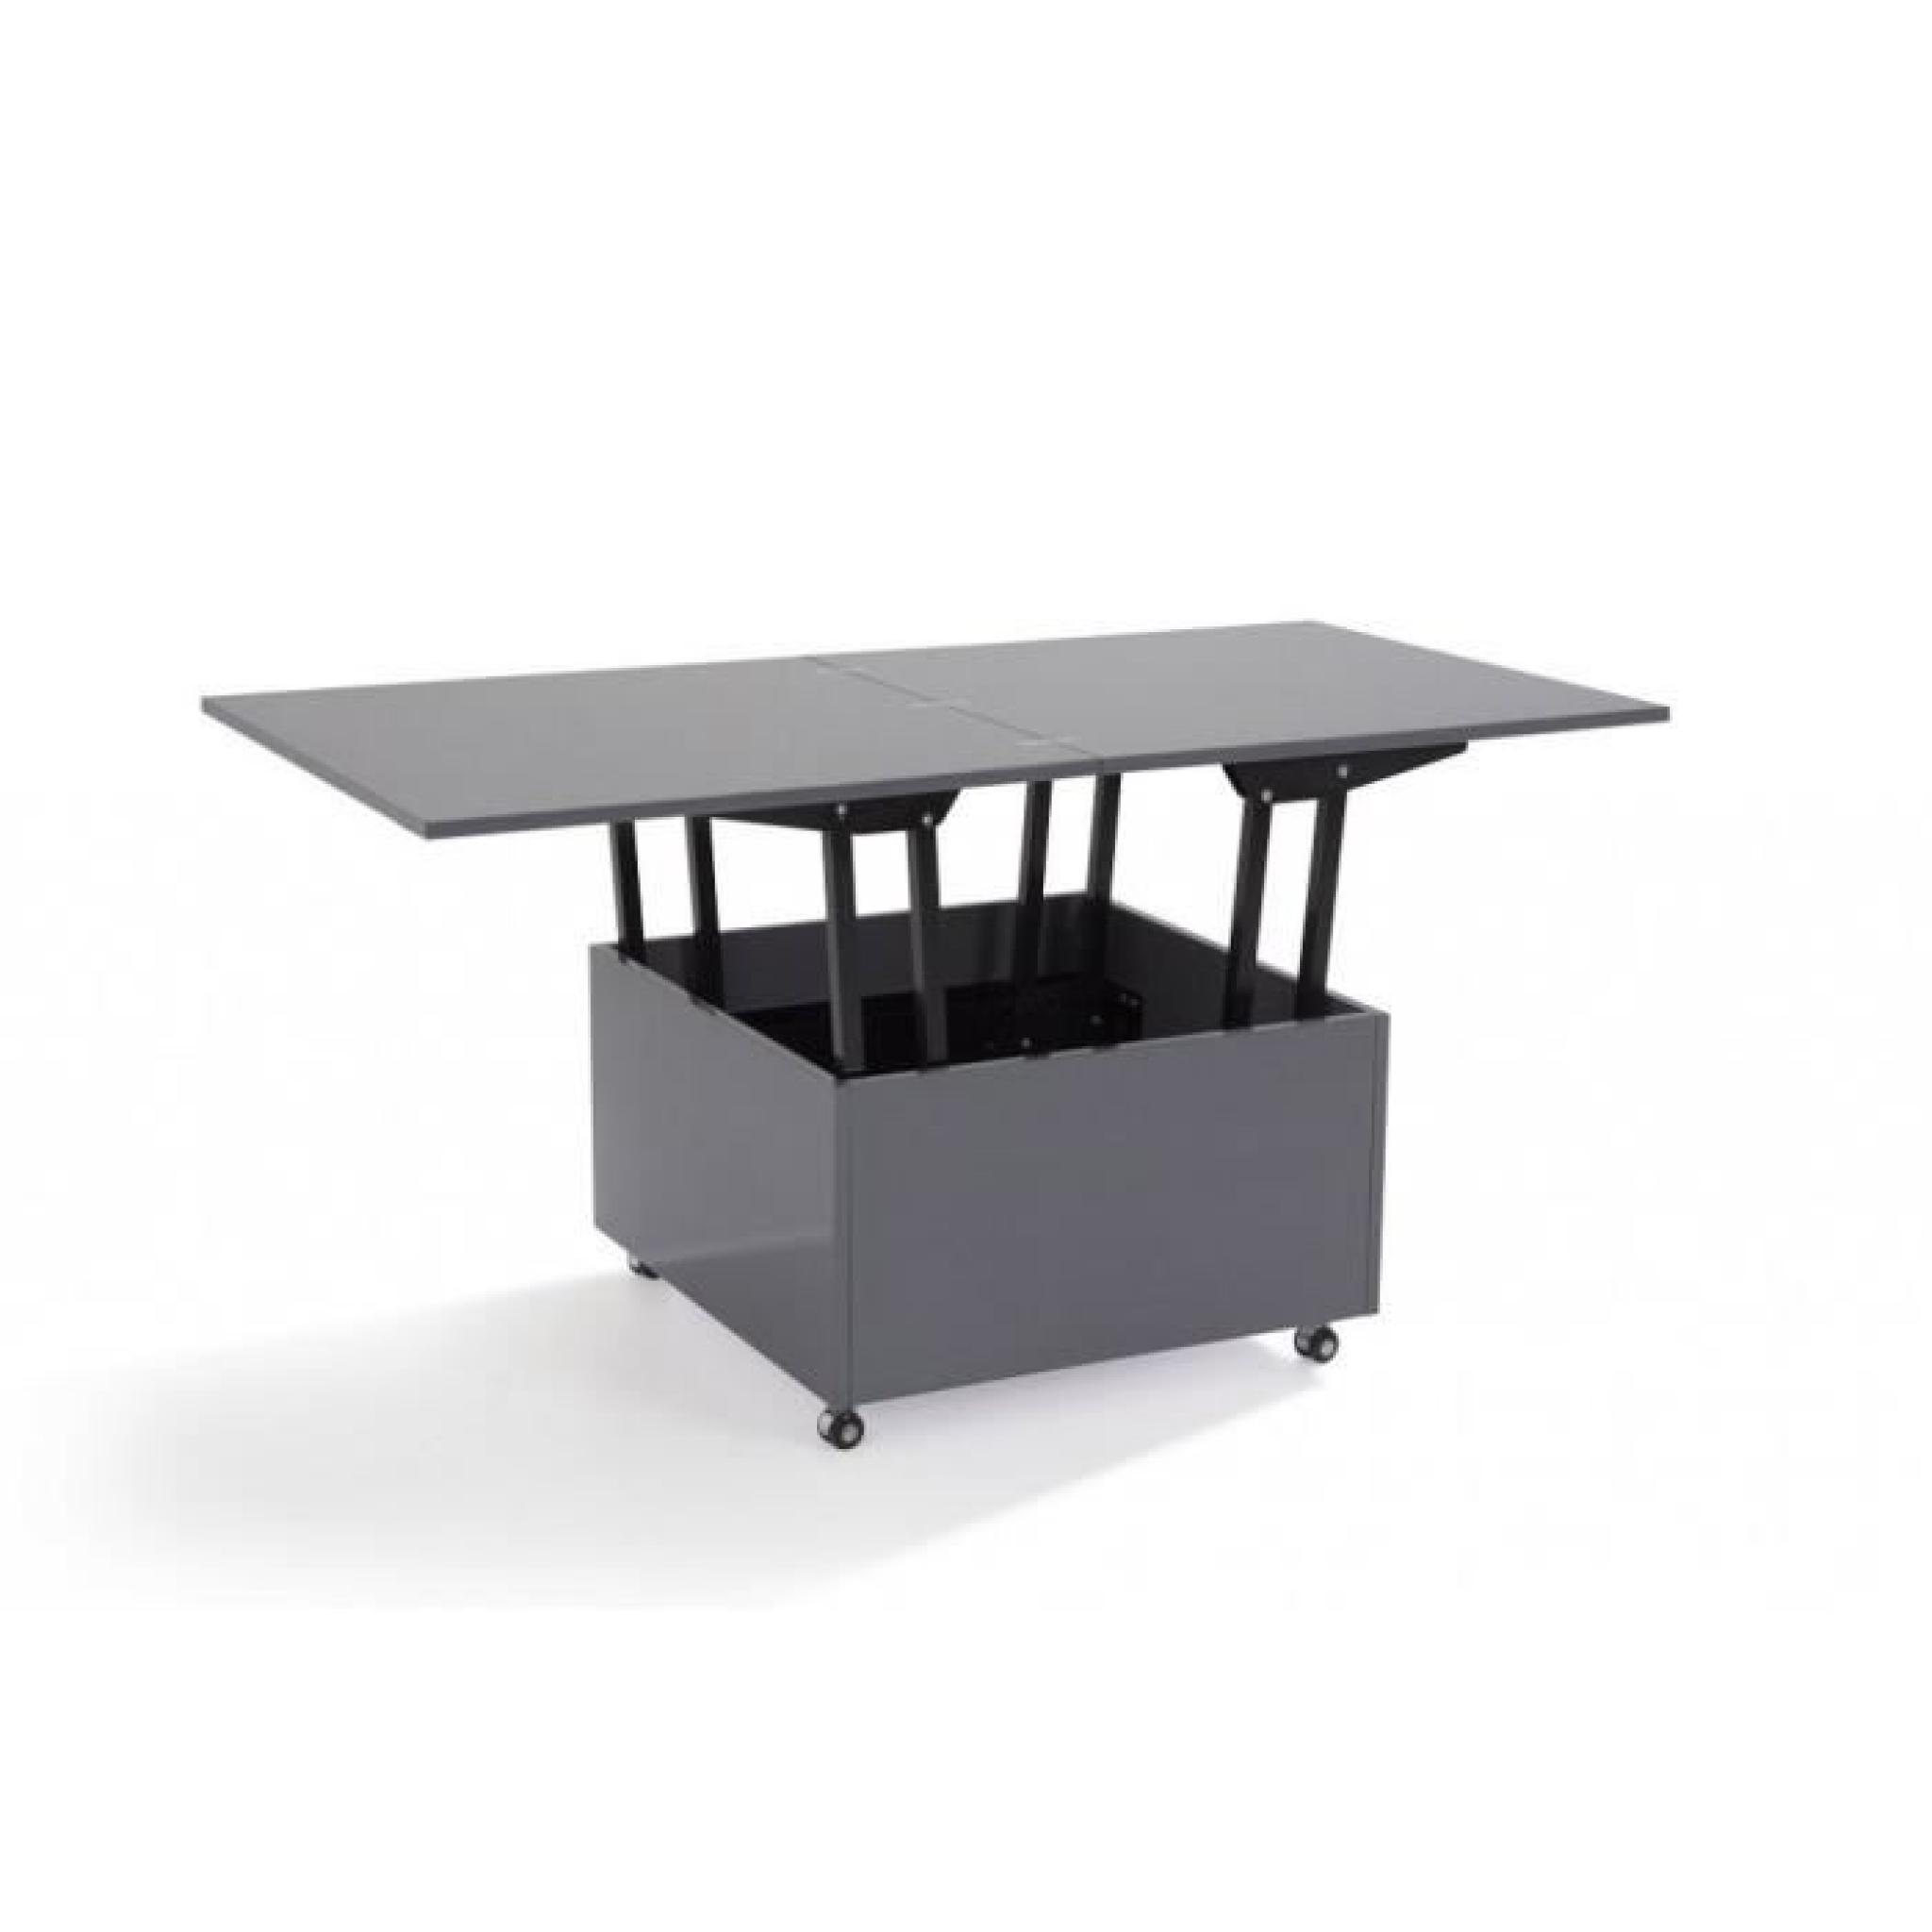 Table basse fly relevable